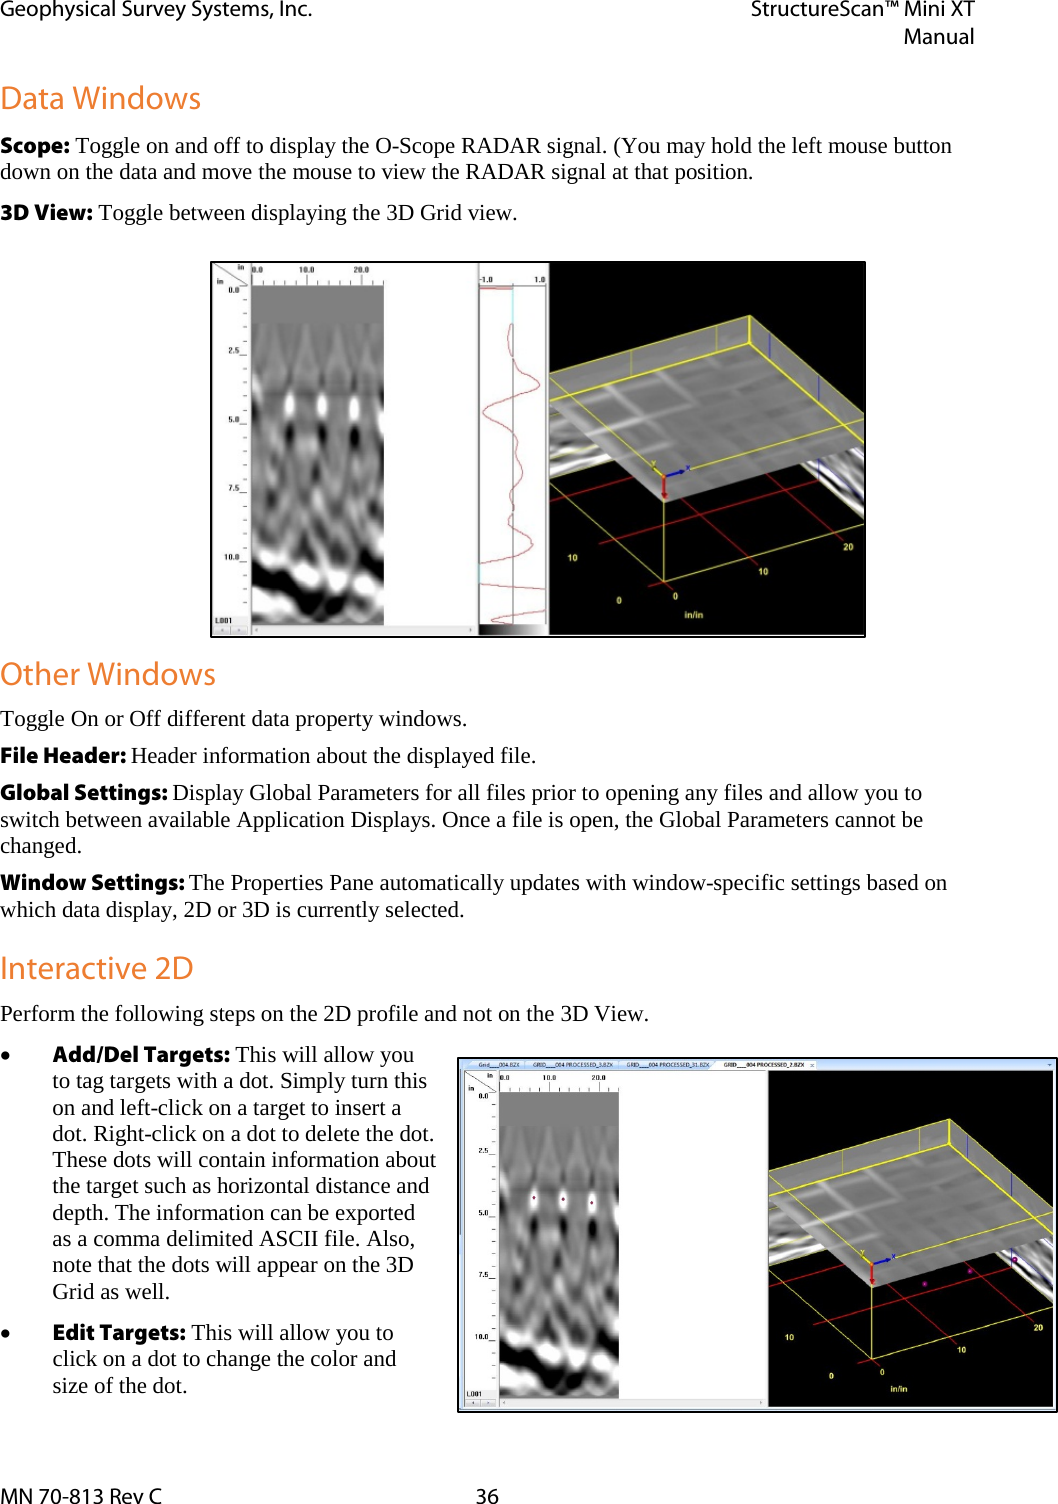 Geophysical Survey Systems, Inc. StructureScan™ Mini XT  Manual  MN 70-813 Rev C 36 Data Windows Scope: Toggle on and off to display the O-Scope RADAR signal. (You may hold the left mouse button down on the data and move the mouse to view the RADAR signal at that position. 3D View: Toggle between displaying the 3D Grid view. Other Windows Toggle On or Off different data property windows.  File Header: Header information about the displayed file. Global Settings: Display Global Parameters for all files prior to opening any files and allow you to switch between available Application Displays. Once a file is open, the Global Parameters cannot be changed. Window Settings: The Properties Pane automatically updates with window-specific settings based on which data display, 2D or 3D is currently selected. Interactive 2D Perform the following steps on the 2D profile and not on the 3D View. • Add/Del Targets: This will allow you to tag targets with a dot. Simply turn this on and left-click on a target to insert a dot. Right-click on a dot to delete the dot. These dots will contain information about the target such as horizontal distance and depth. The information can be exported as a comma delimited ASCII file. Also, note that the dots will appear on the 3D Grid as well. • Edit Targets: This will allow you to click on a dot to change the color and size of the dot. 